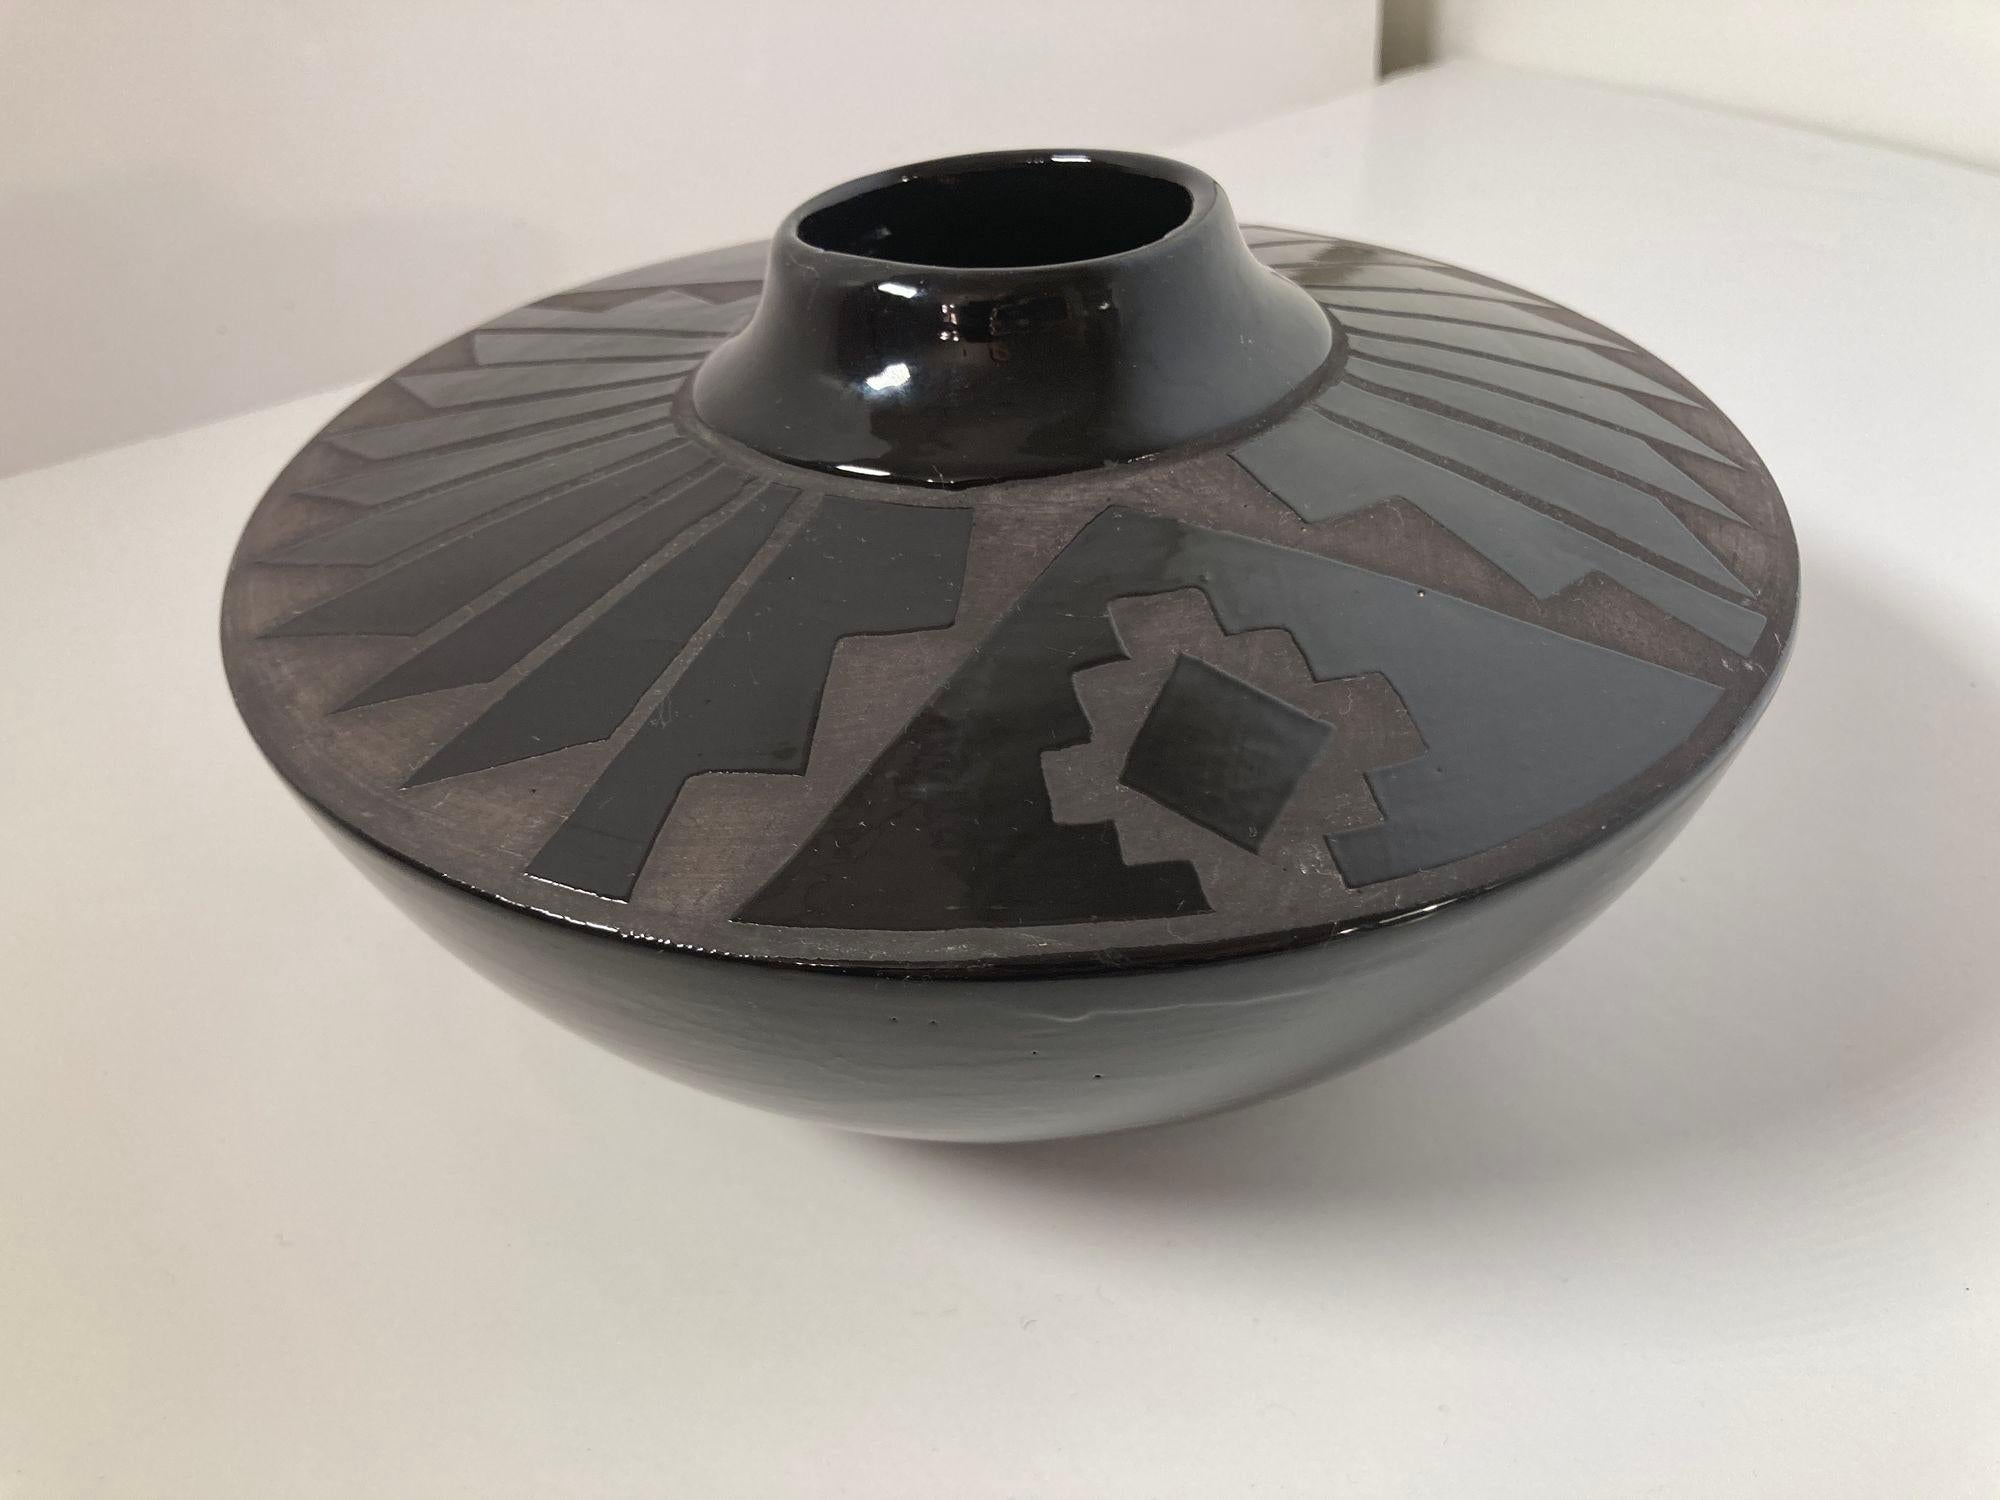 Mata Ortiz style beautiful hand-turned geometric blackware vase, black on black.
The round pottery piece is made of black glaze clay and etched with a unique geometric arrow design in the style of the potter of Mata Ortiz.
The artists of Mata Ortiz